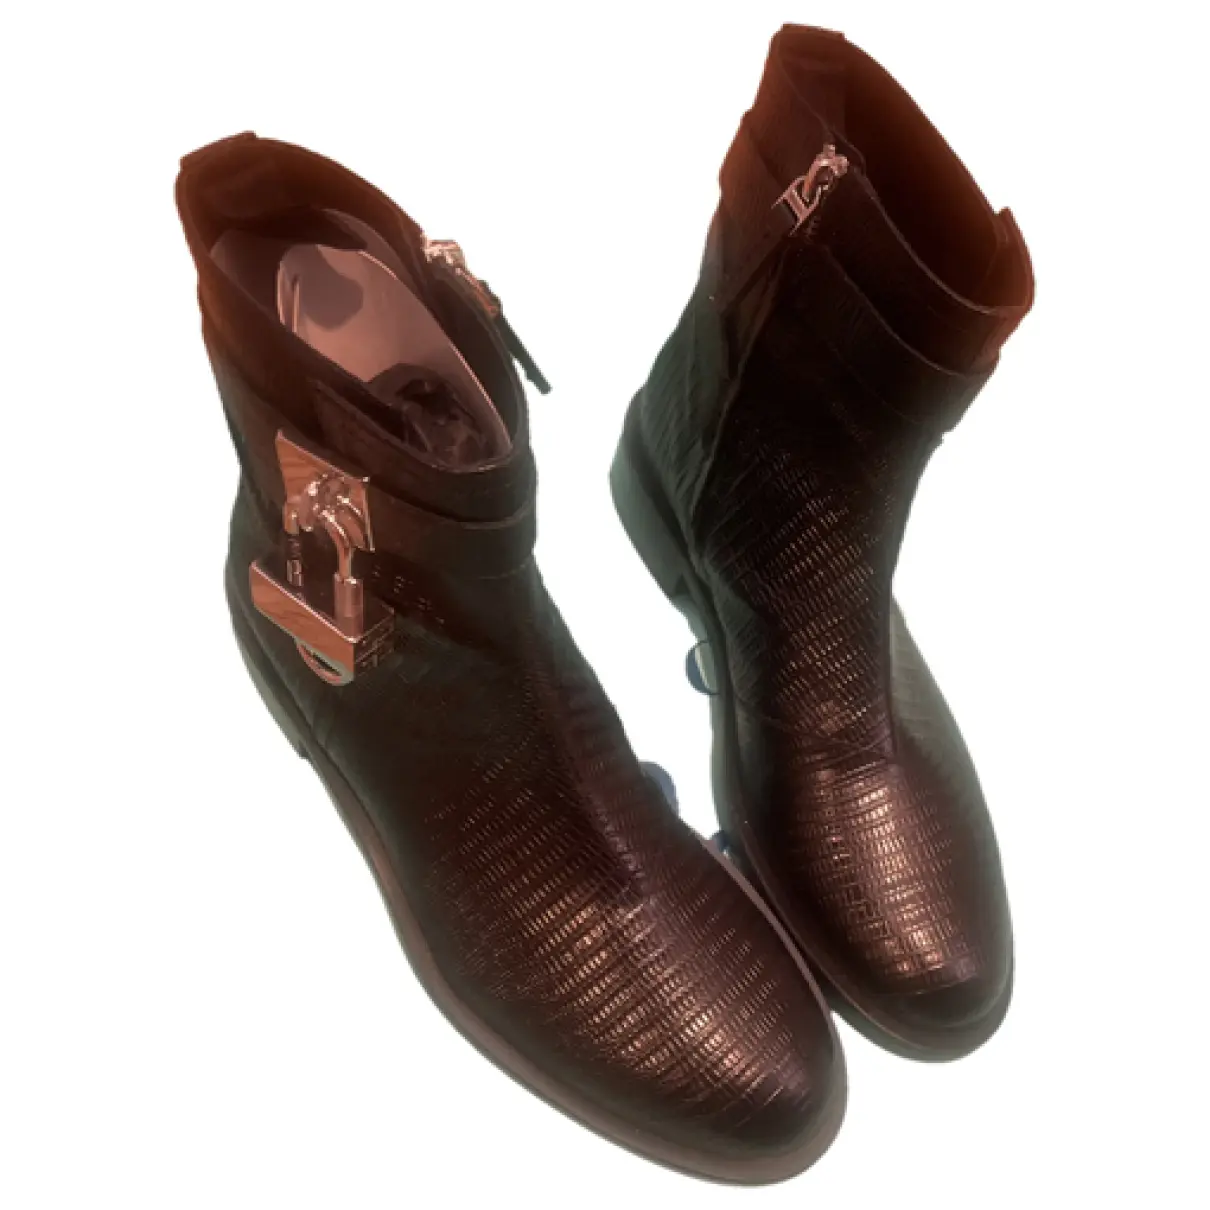 Shark leather boots